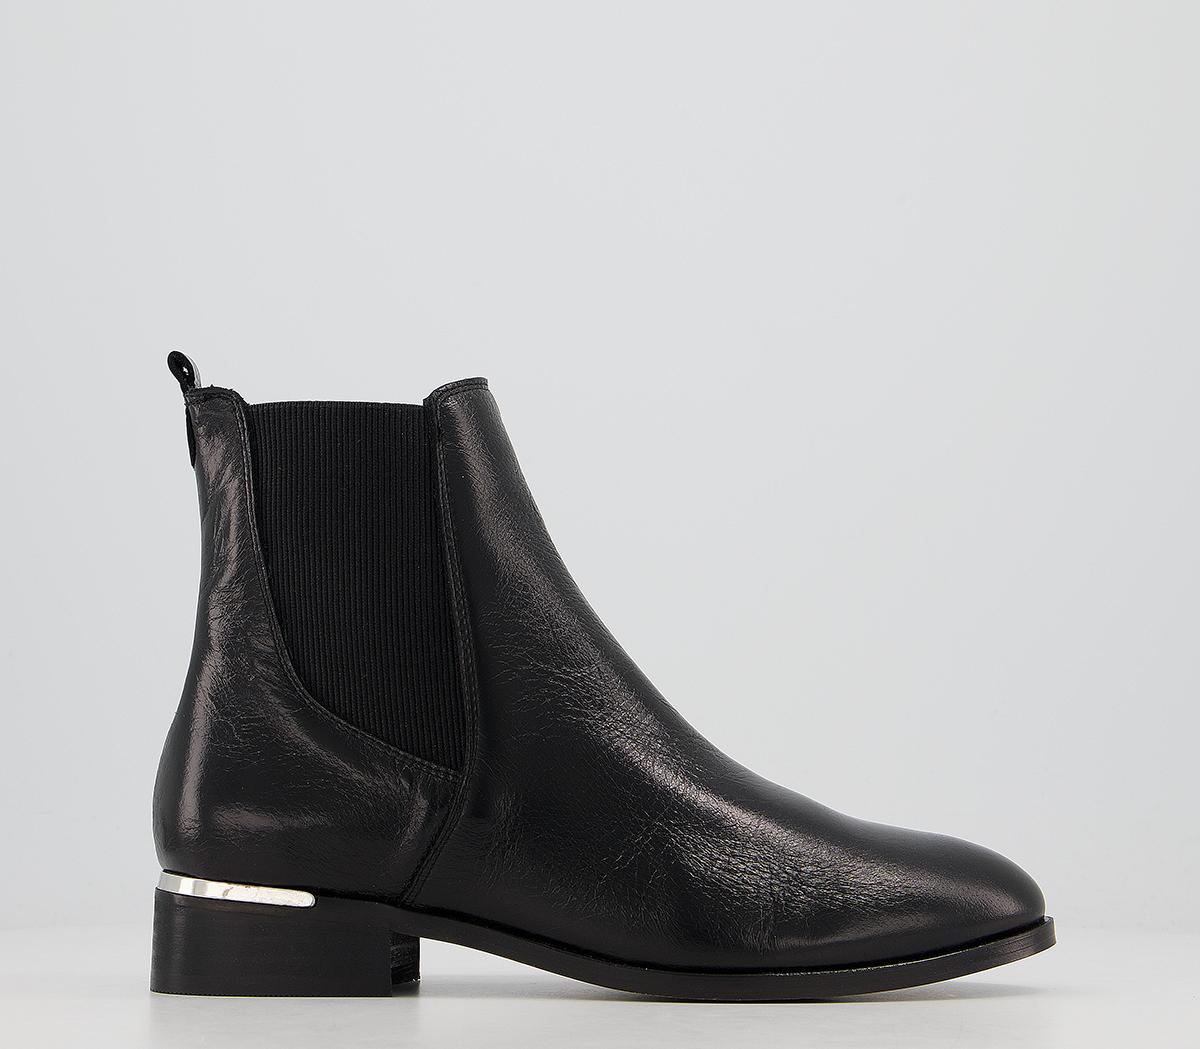 OFFICEAnika Smart Chelsea Boots With Metal ClipBlack Leather